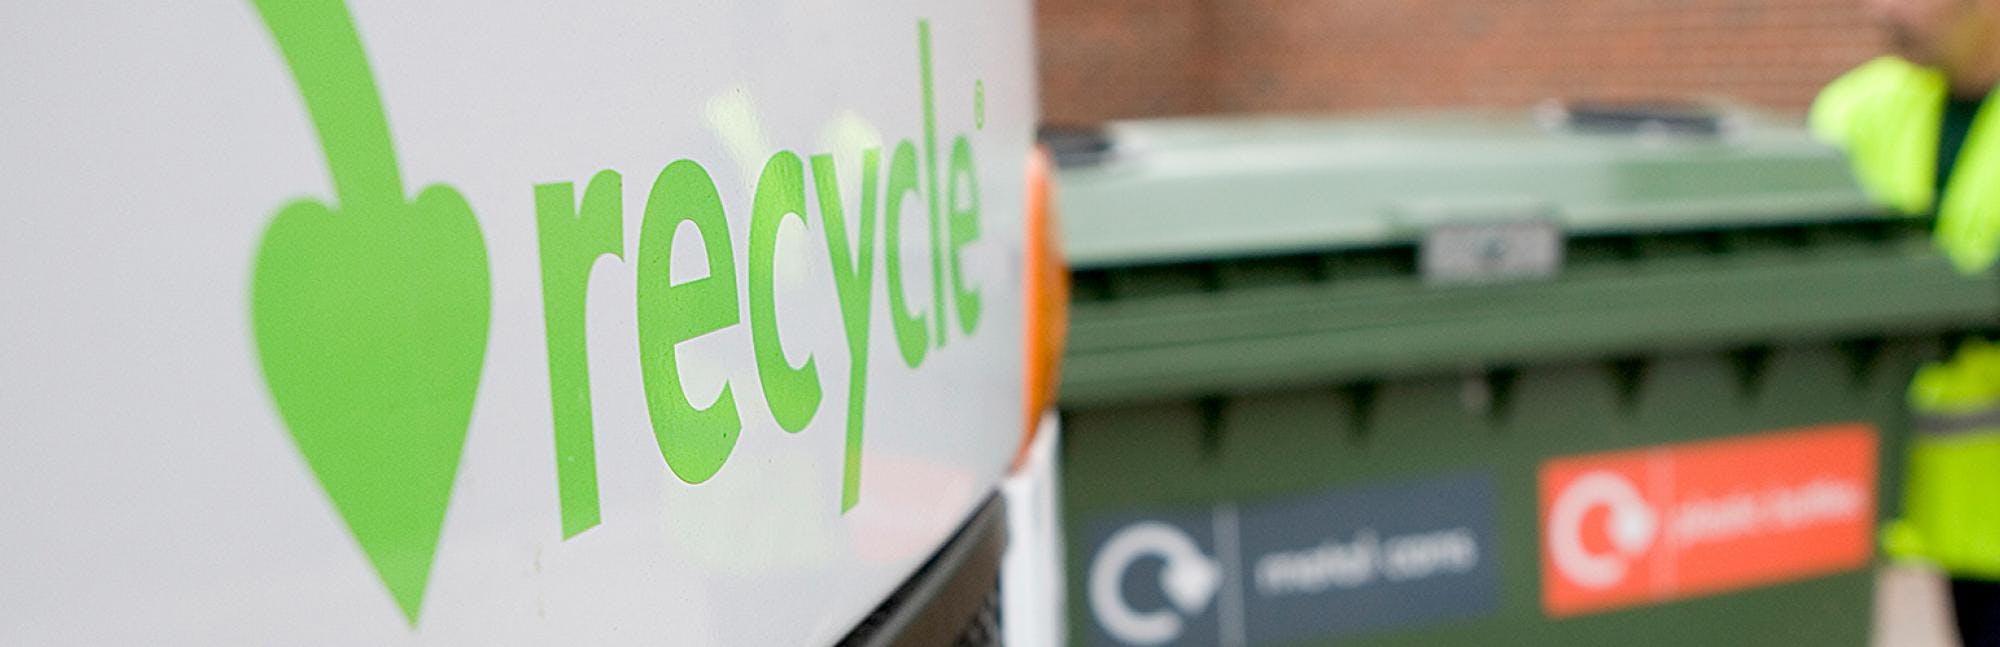 Close-up of a white vehicle with Recycle logo on the bonnet in green with recycling bins in the background